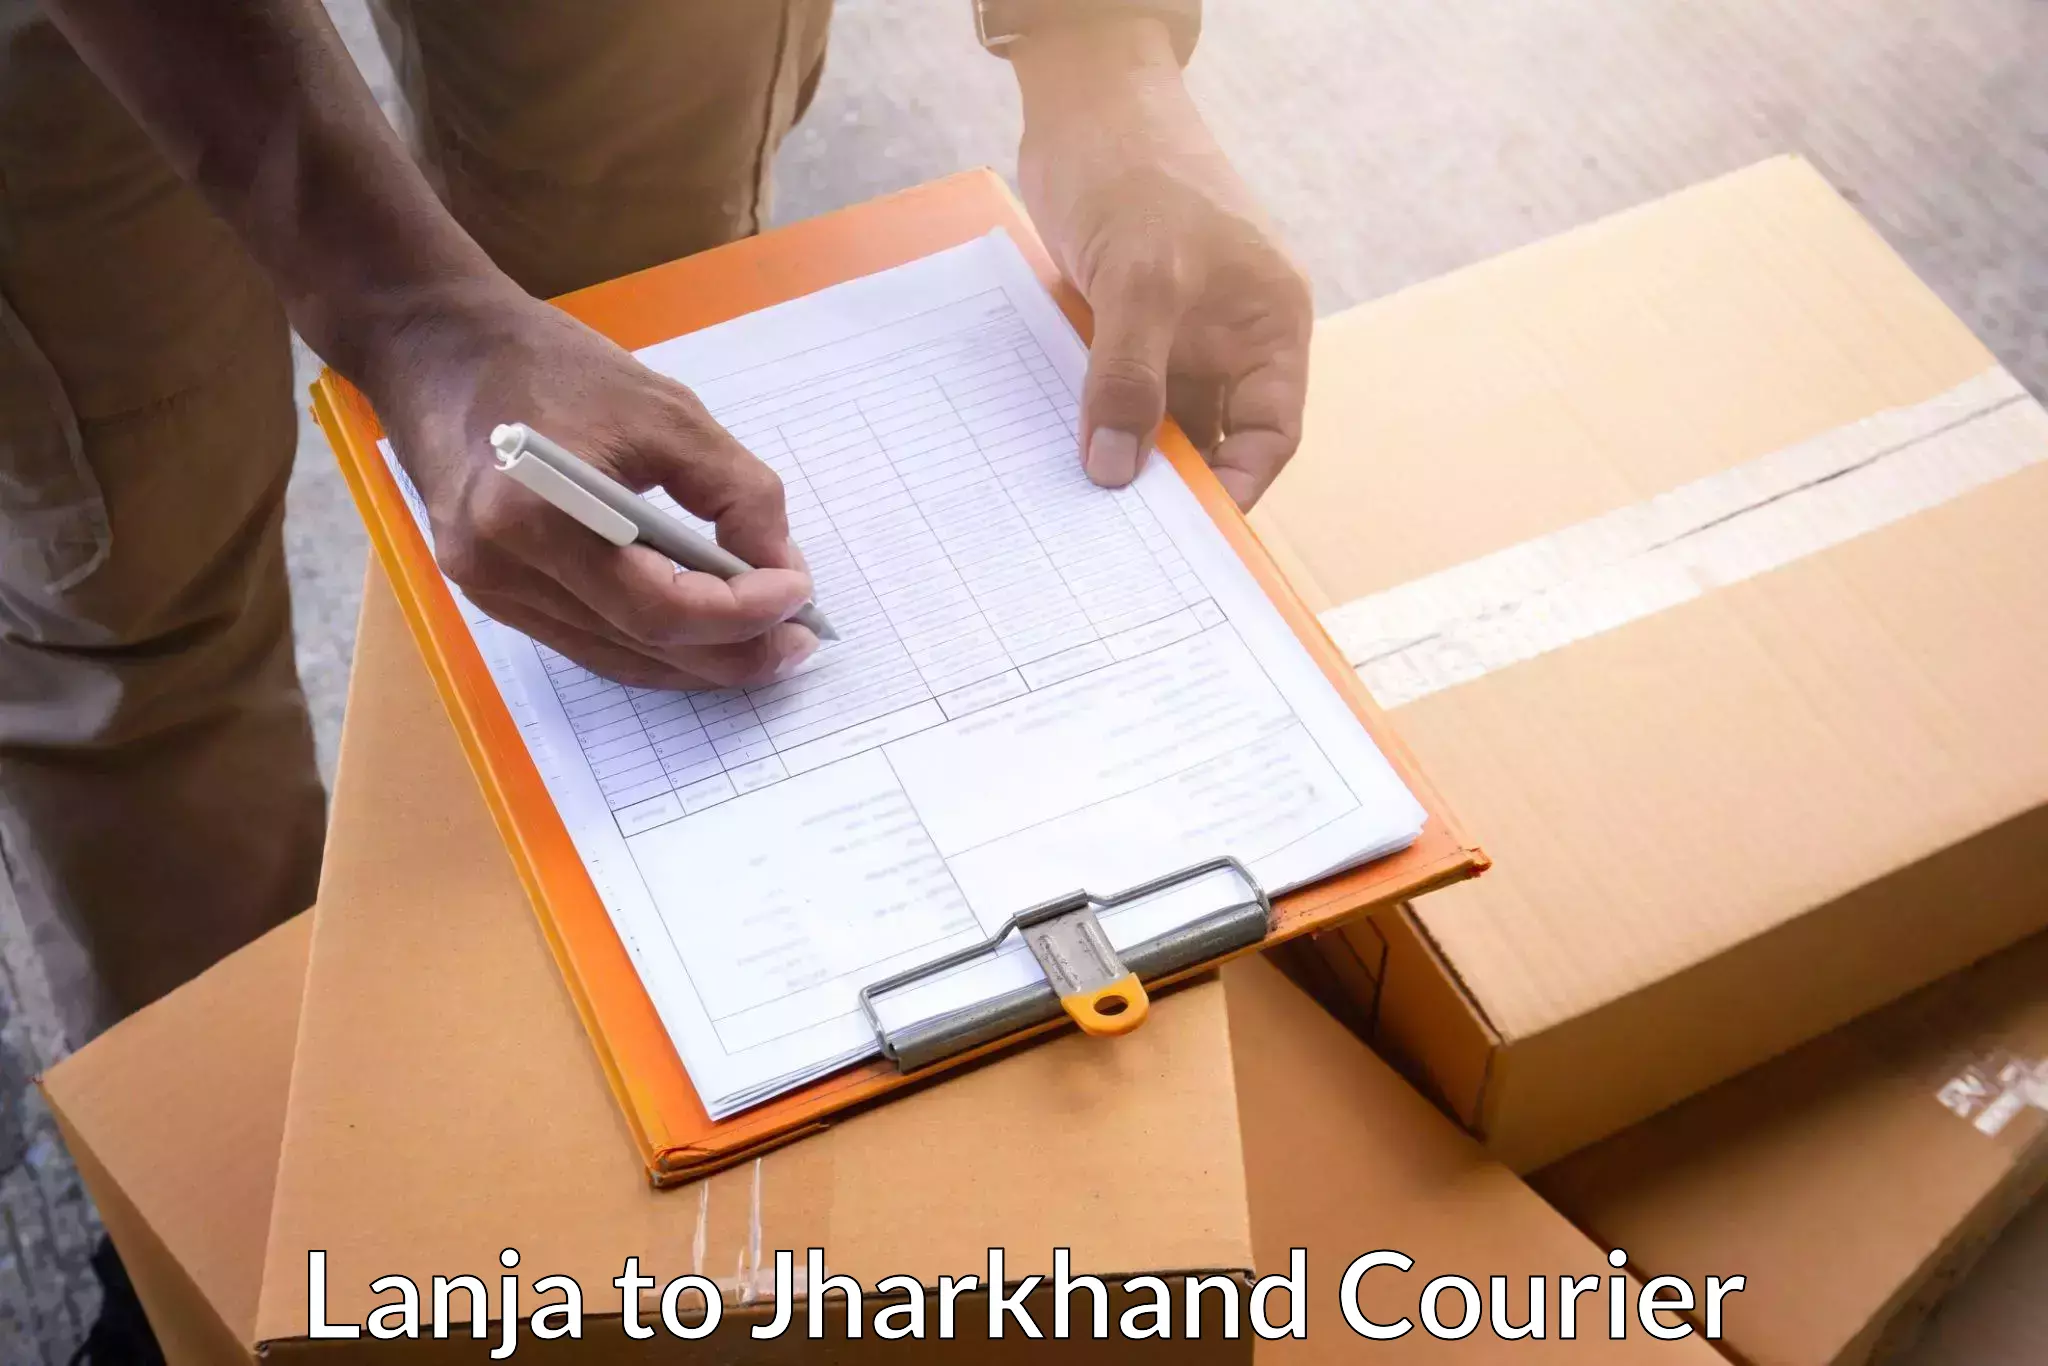 Doorstep delivery service Lanja to Jharkhand